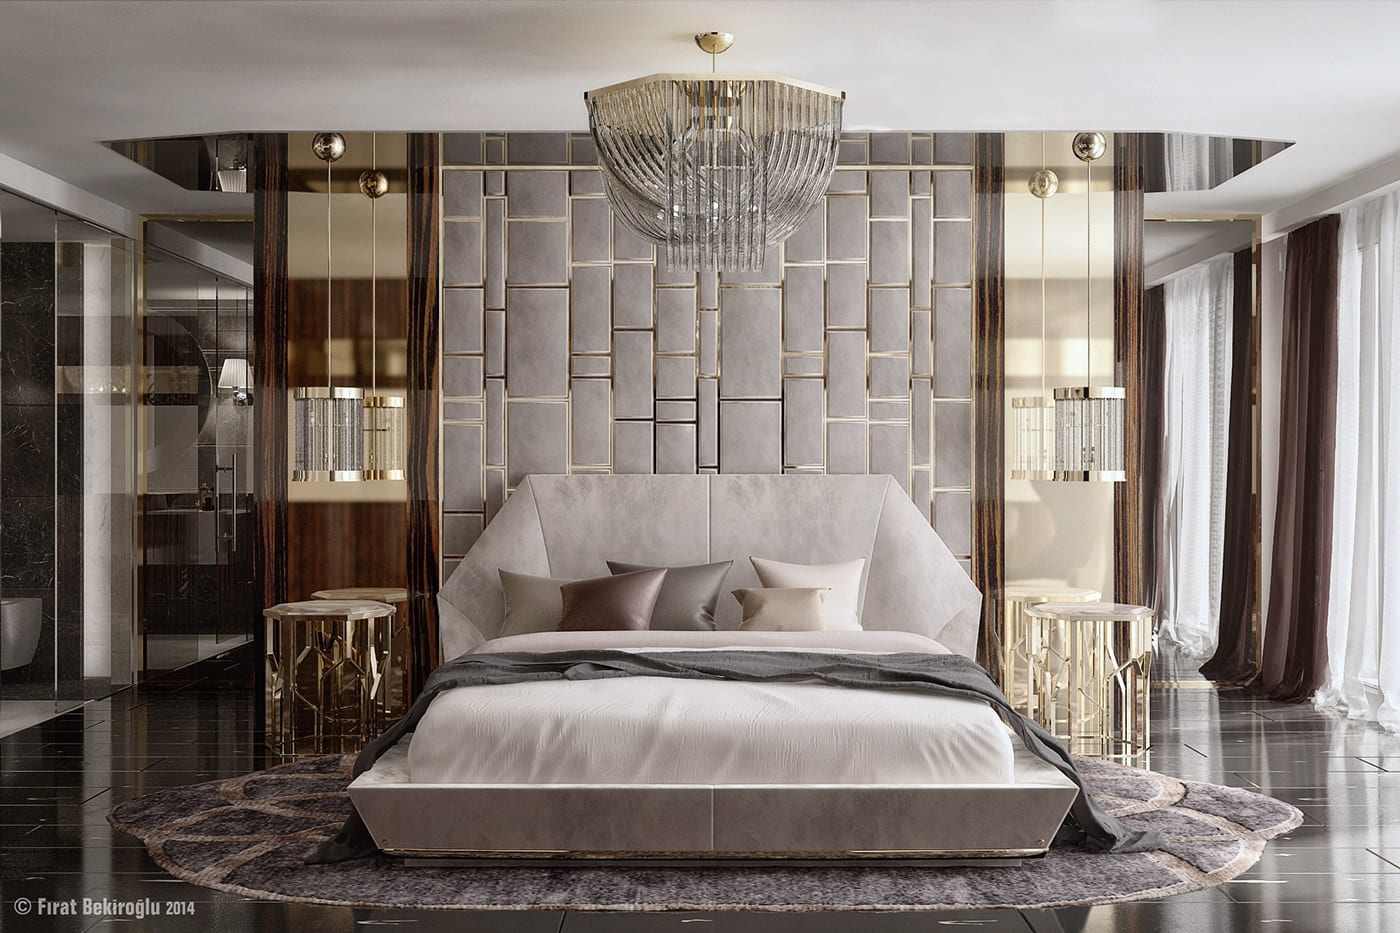 What Furniture Adds Glamour to Bedrooms?